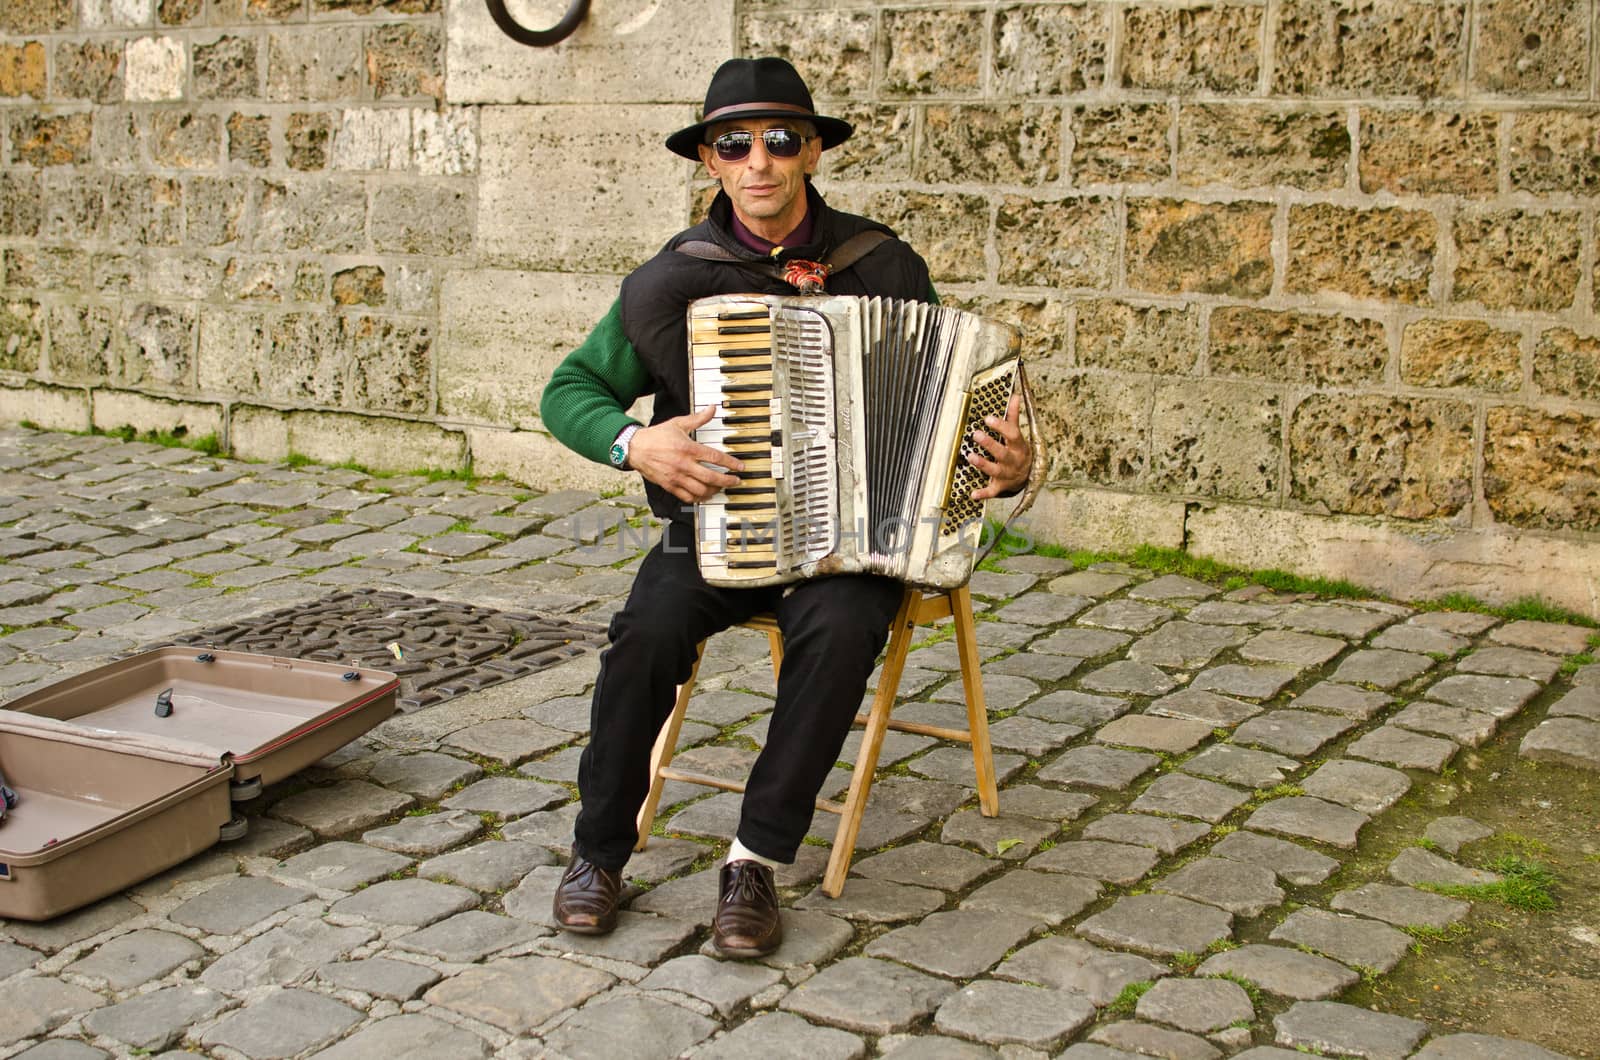 musician of the street, Paris, France by lauria